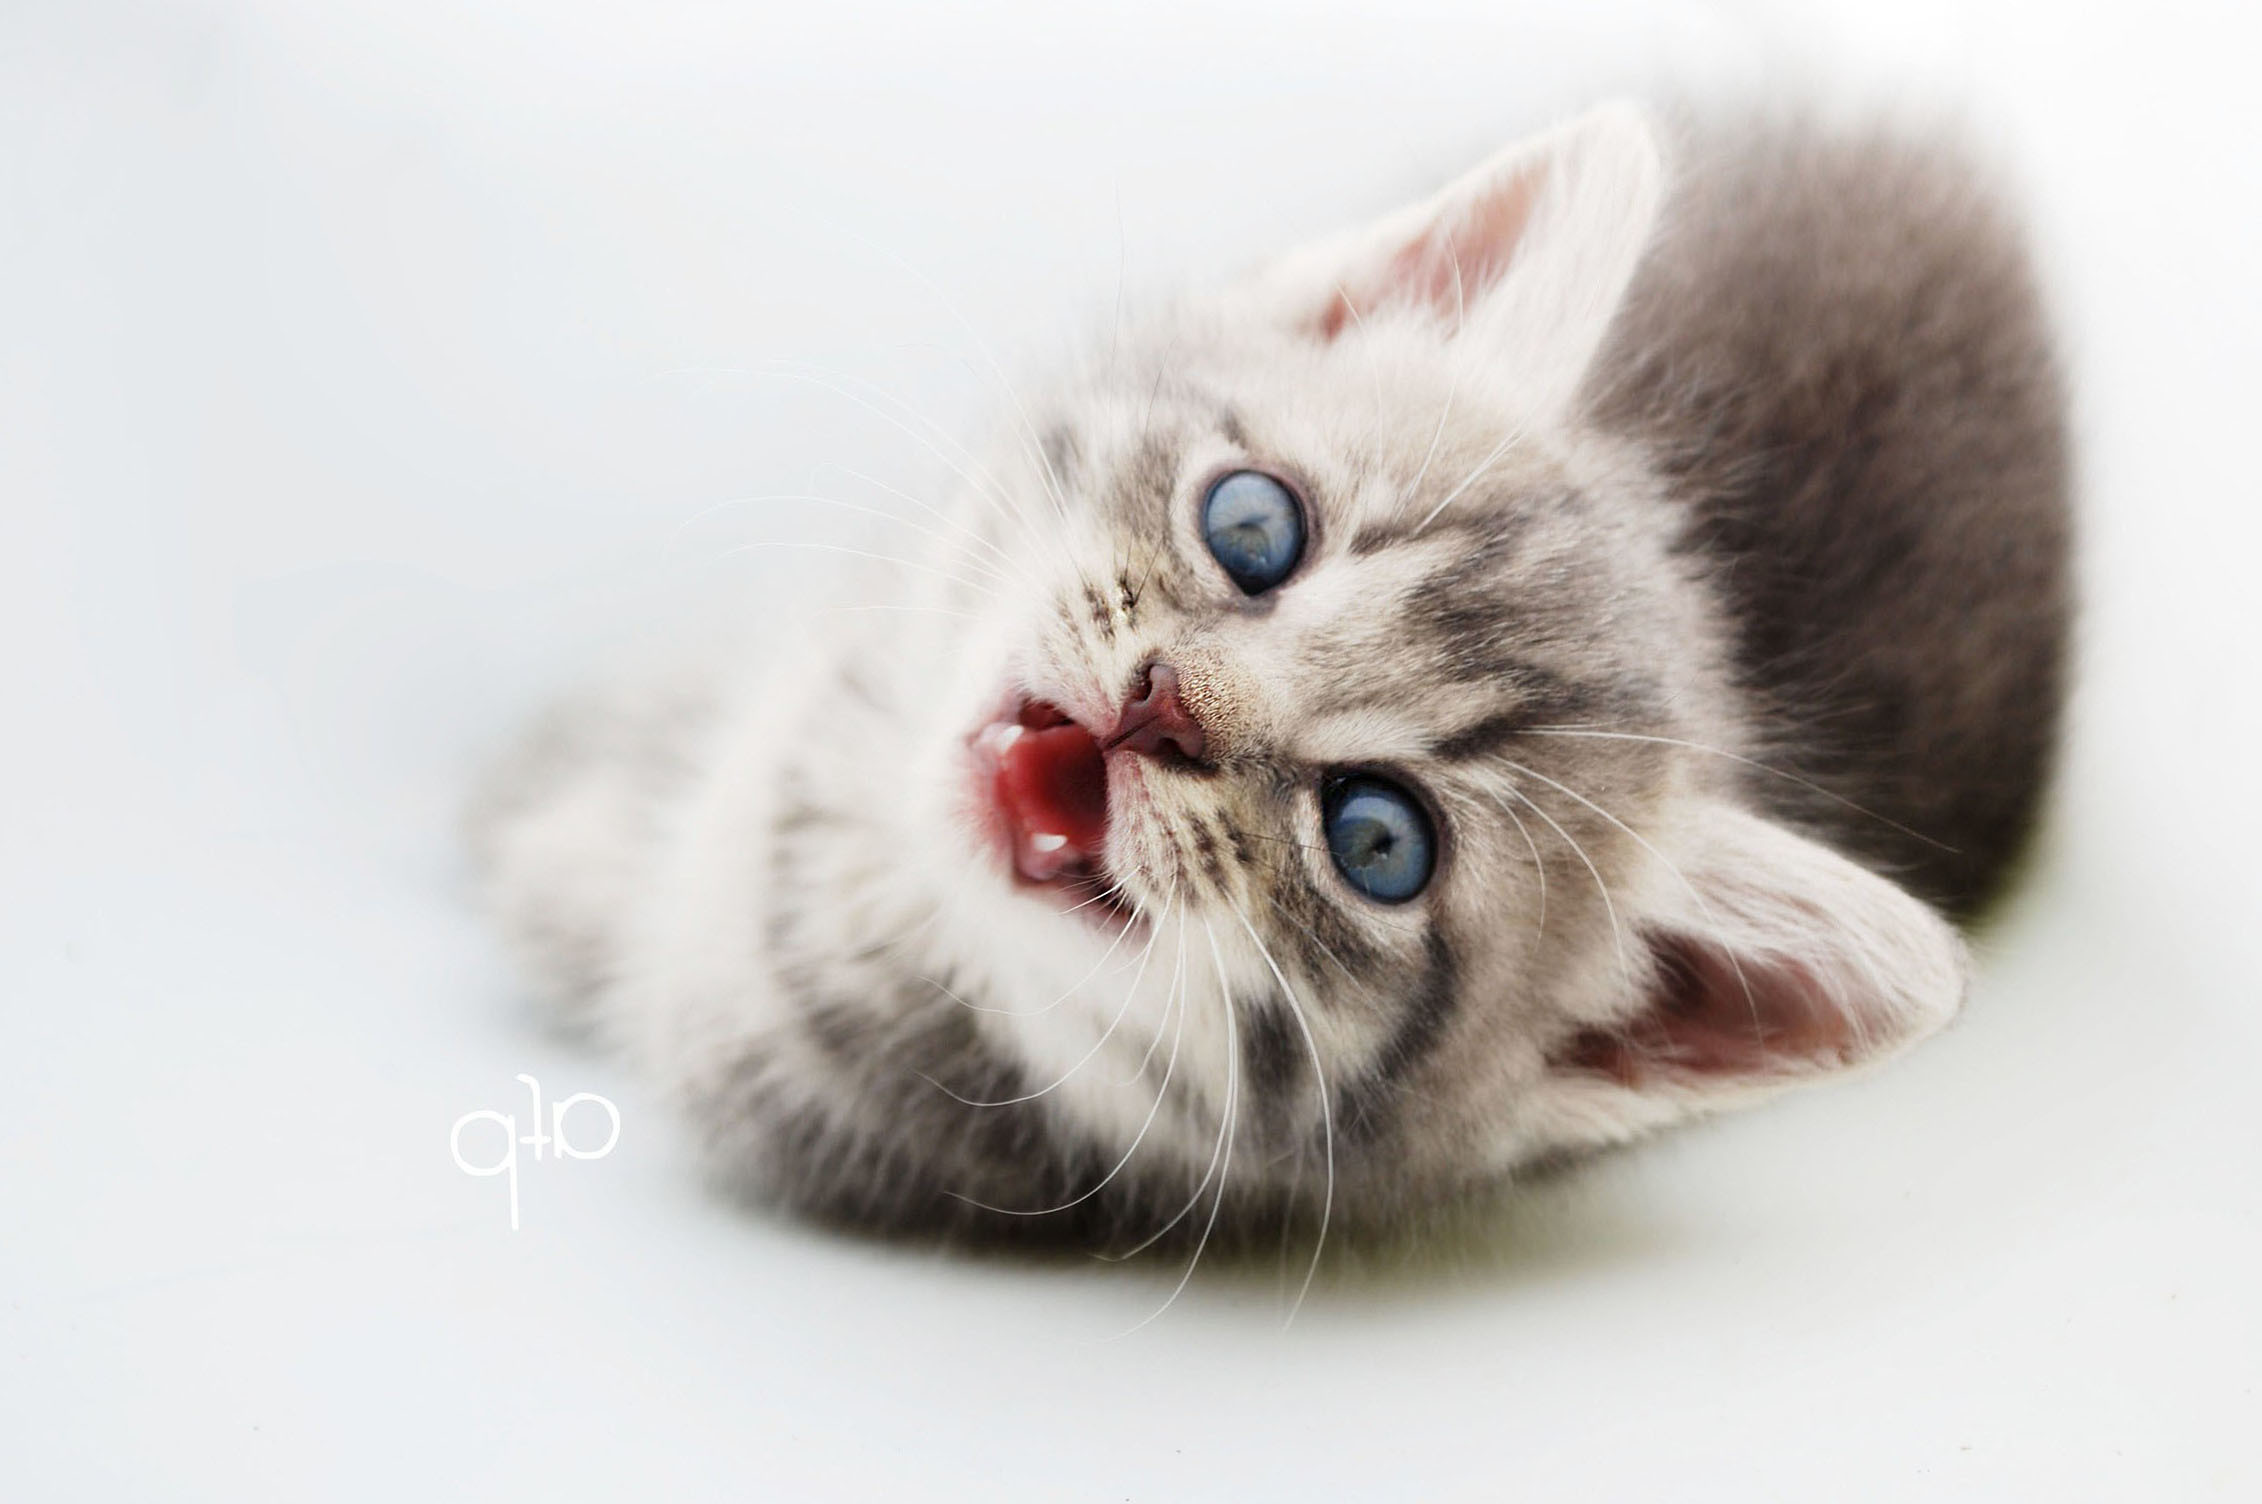 Cat Wallpapers, Hd Cat Images, Animal Photos, Cat Eye, Cute Cats,